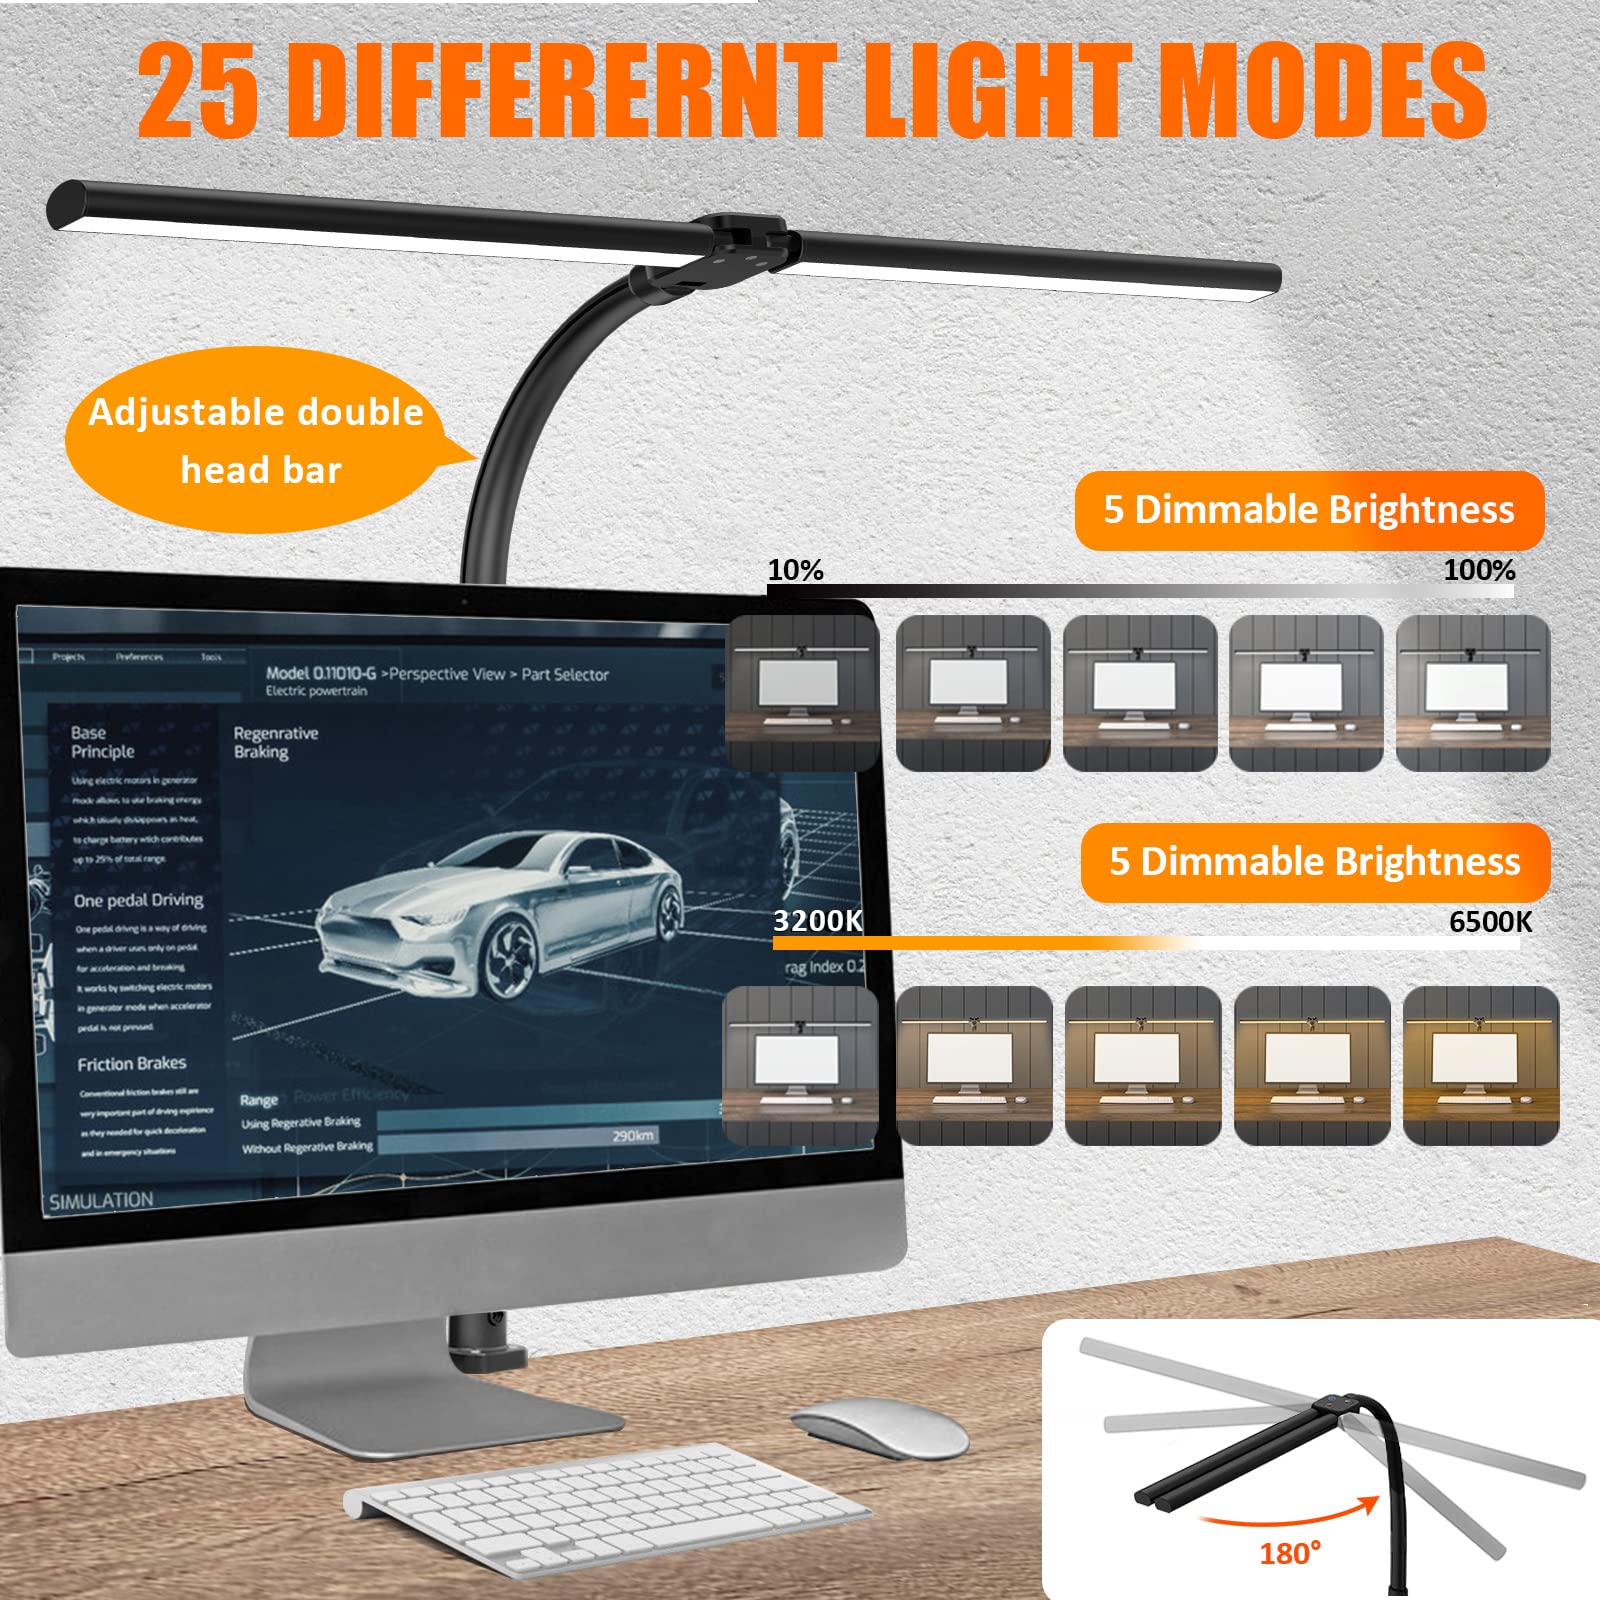 SICCOO LED Double Head Desk Lamp,24W Brightest Architect Double Swing-arm Table Lamps,5 Adjustable Brightness Color Temperature ，for Workbench/Monitor/Home/Reading/Offices/Bedrooms/Dormitories